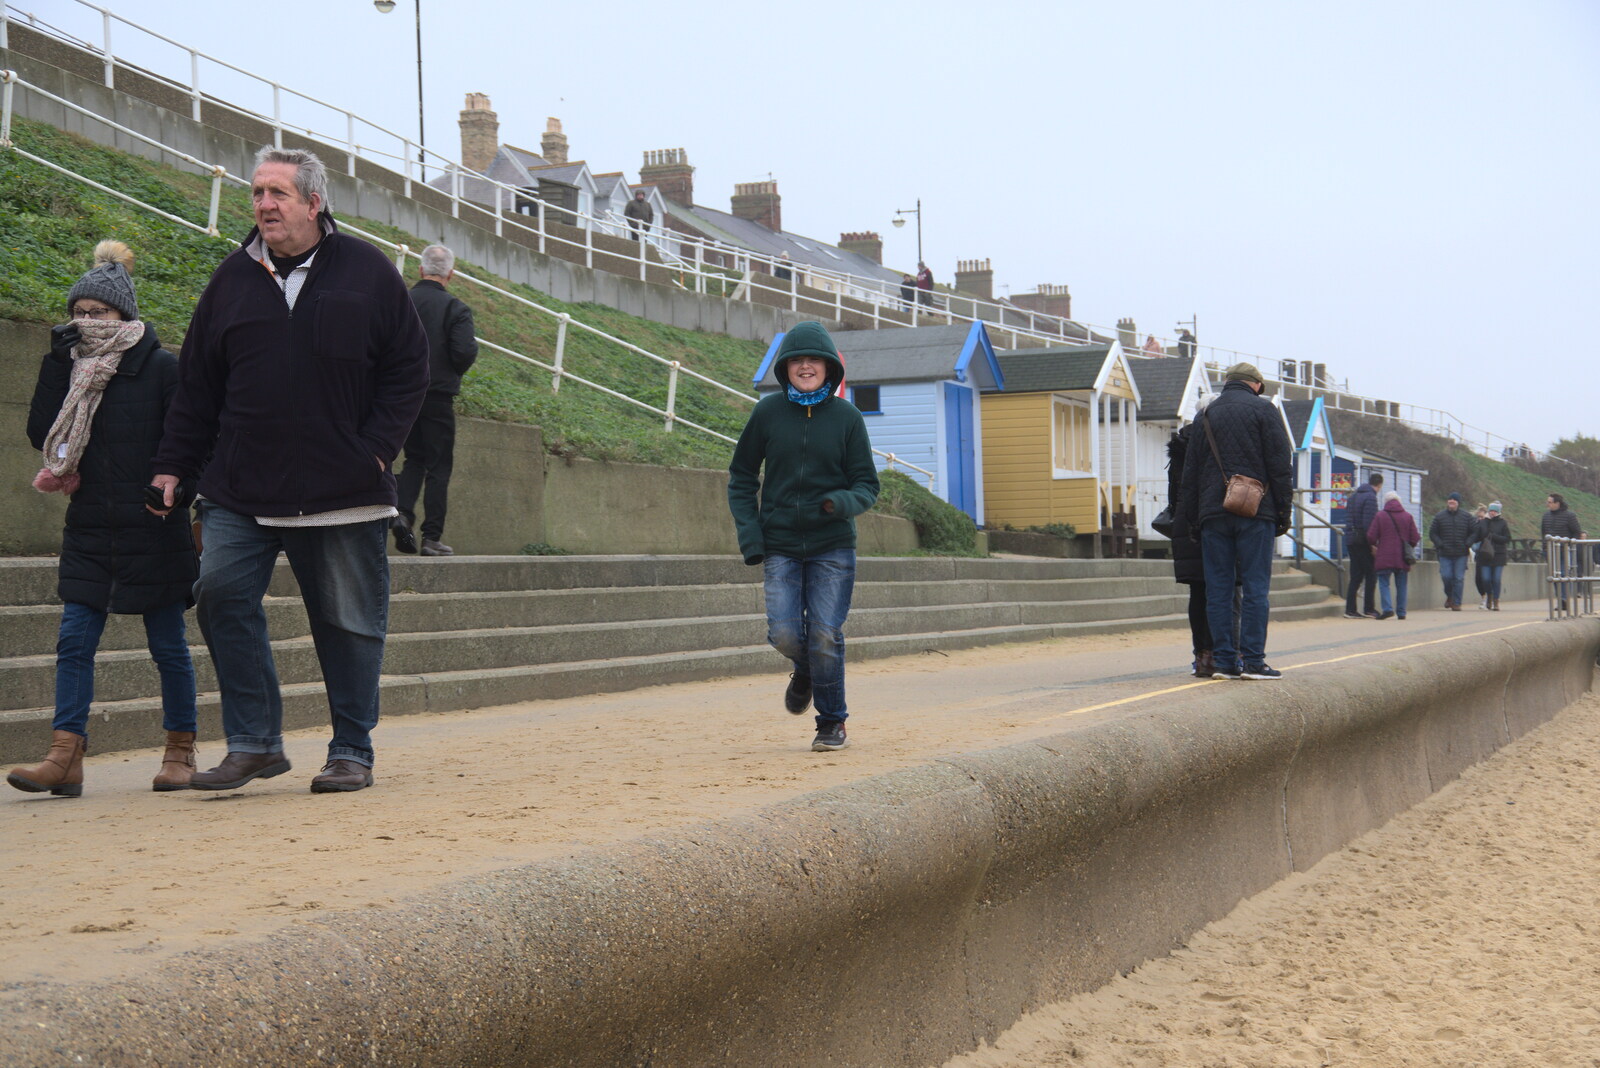 Fred runs along the promenade from A Few Hours at the Seaside, Southwold, Suffolk - 27th December 2021